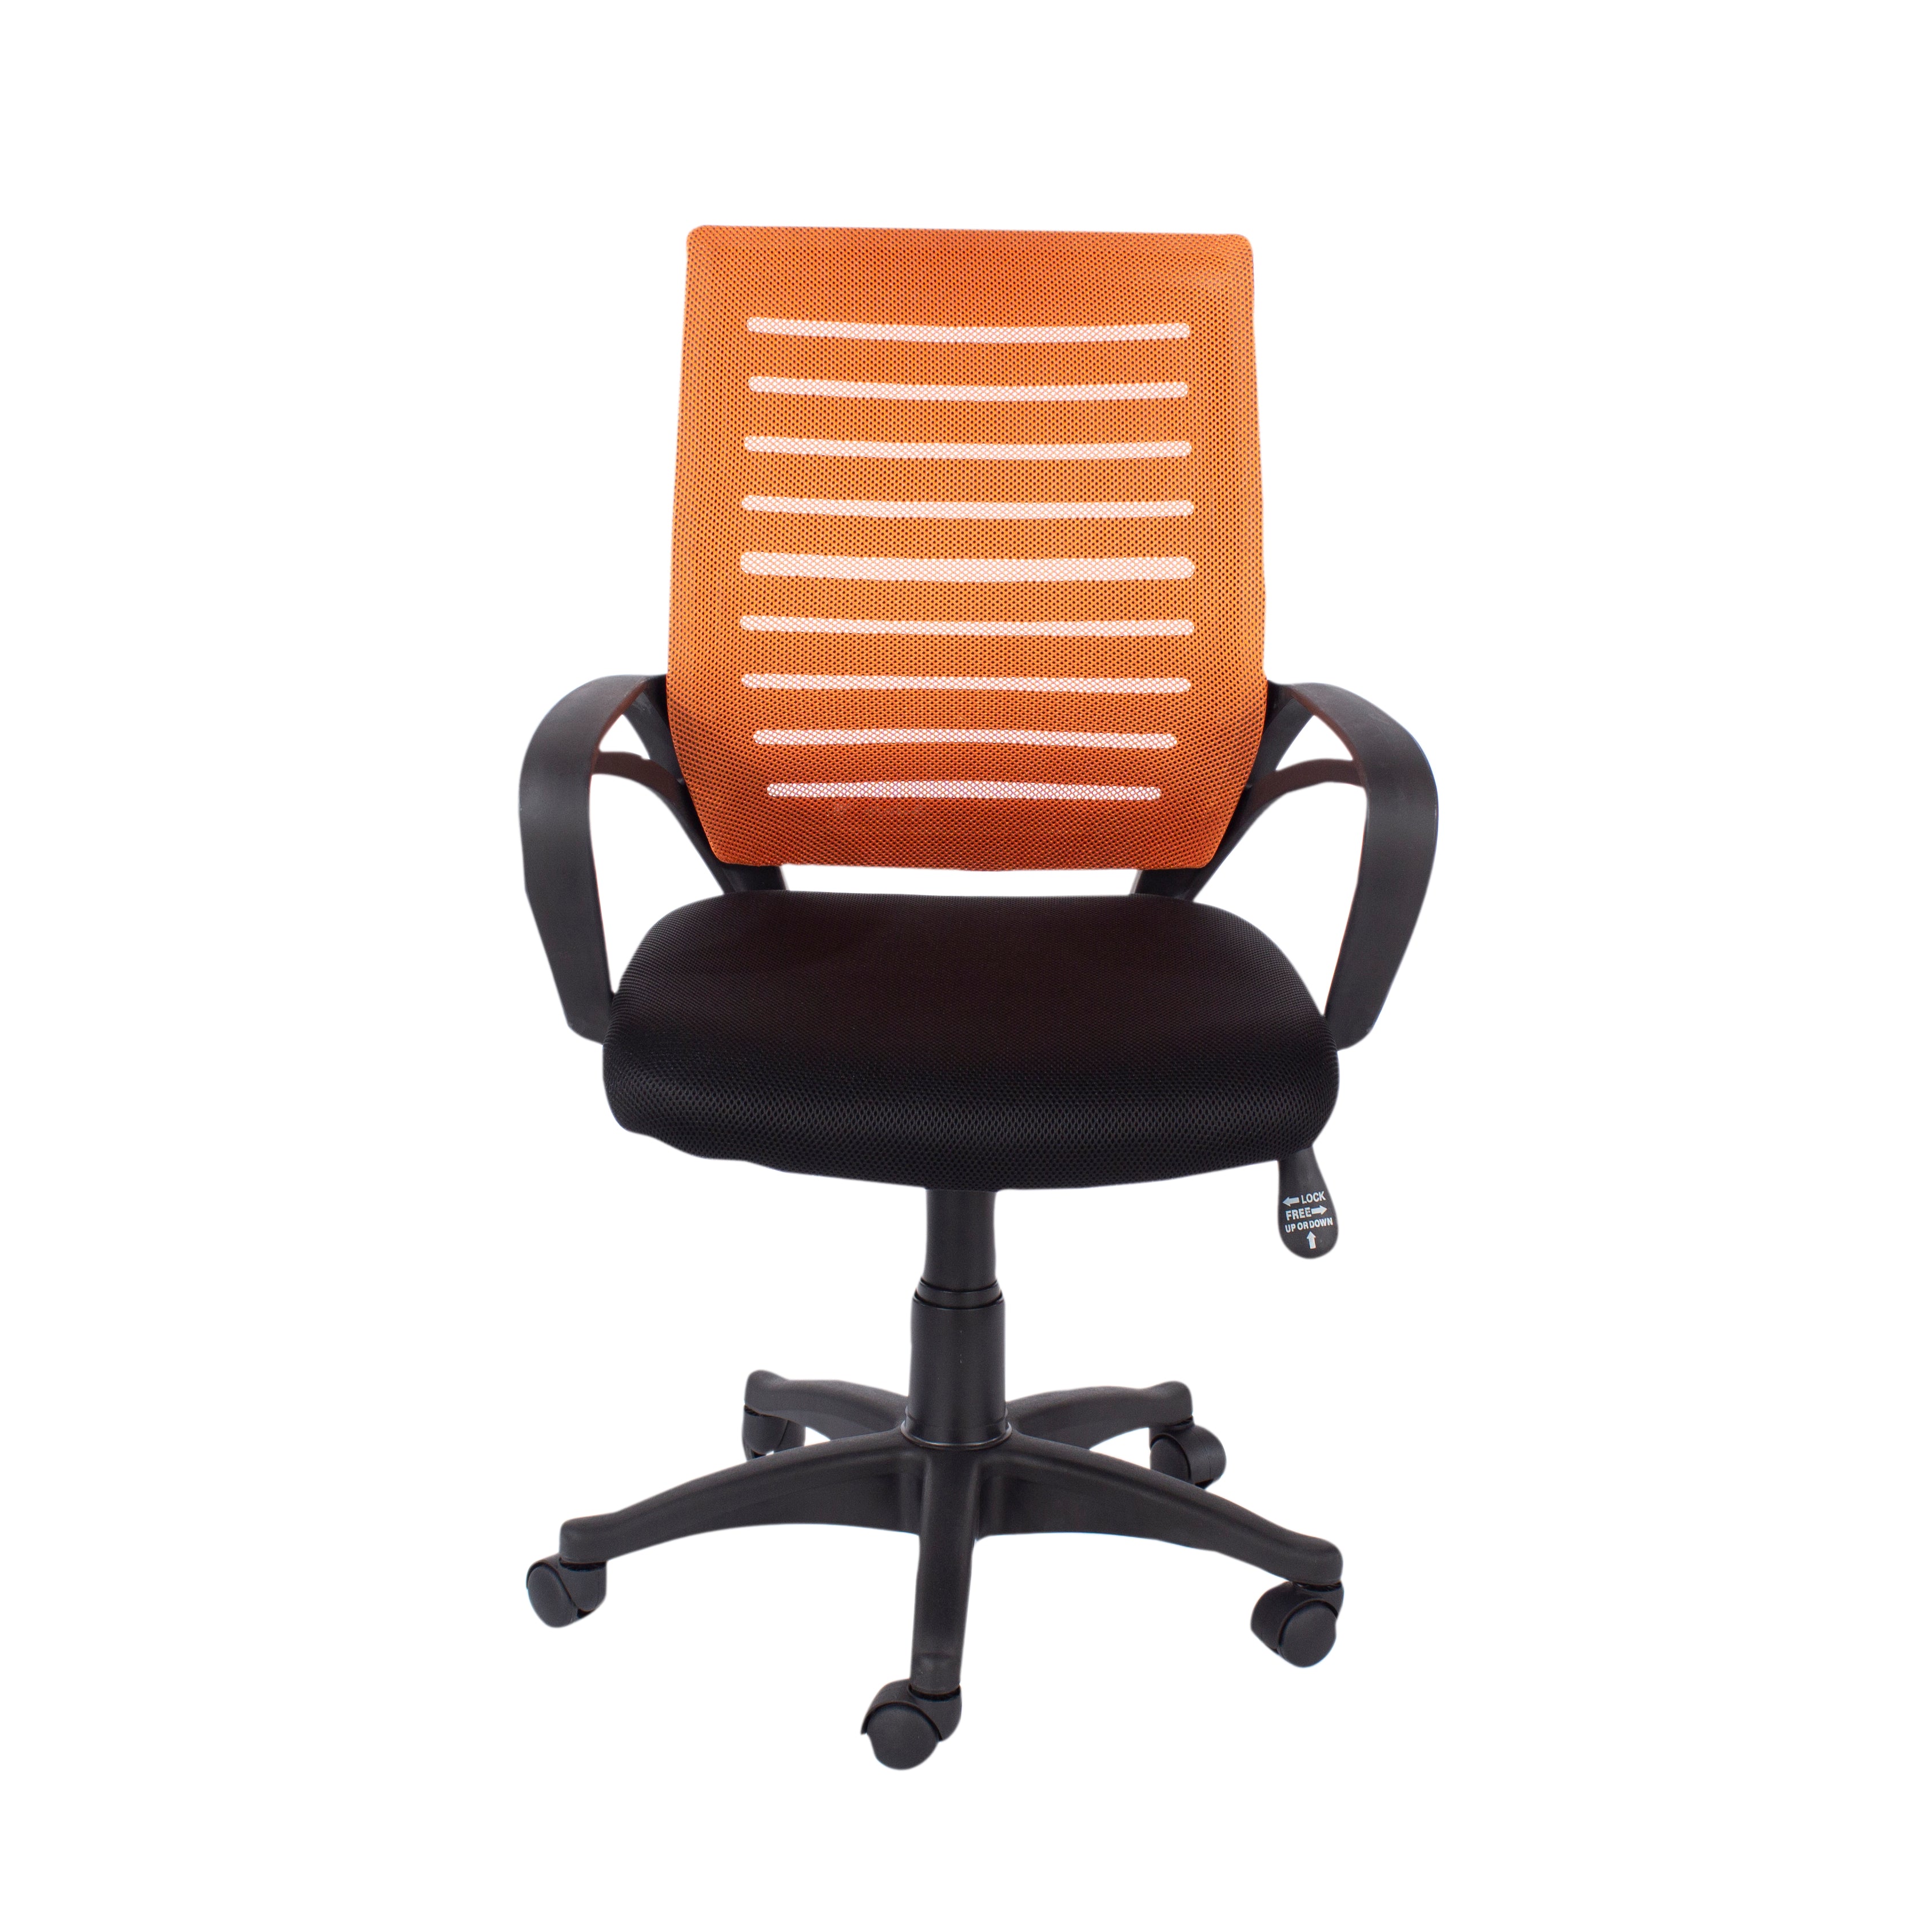 Study Chair With Arms, Orange Mesh Back, Black Fabric Seat & Black Base